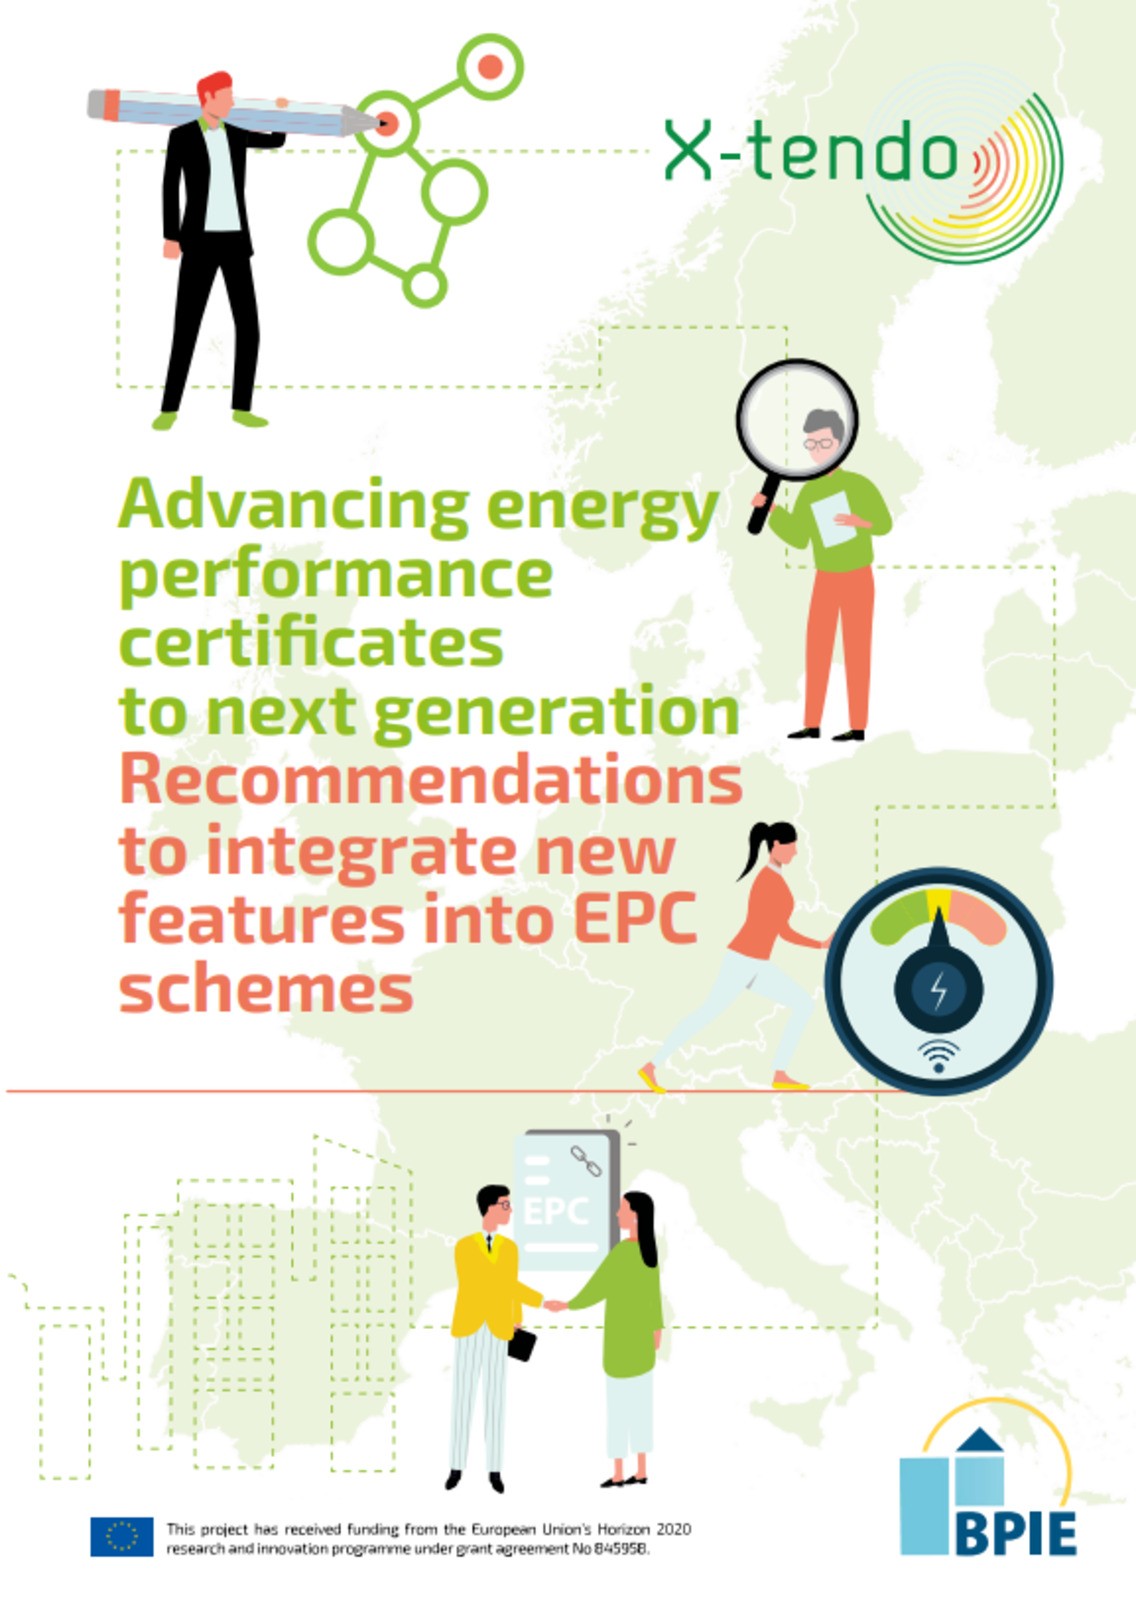 Advancing energy performance certificates to next generation: X-tendo gives a series of recommendations to integrate new features into EPC schemes